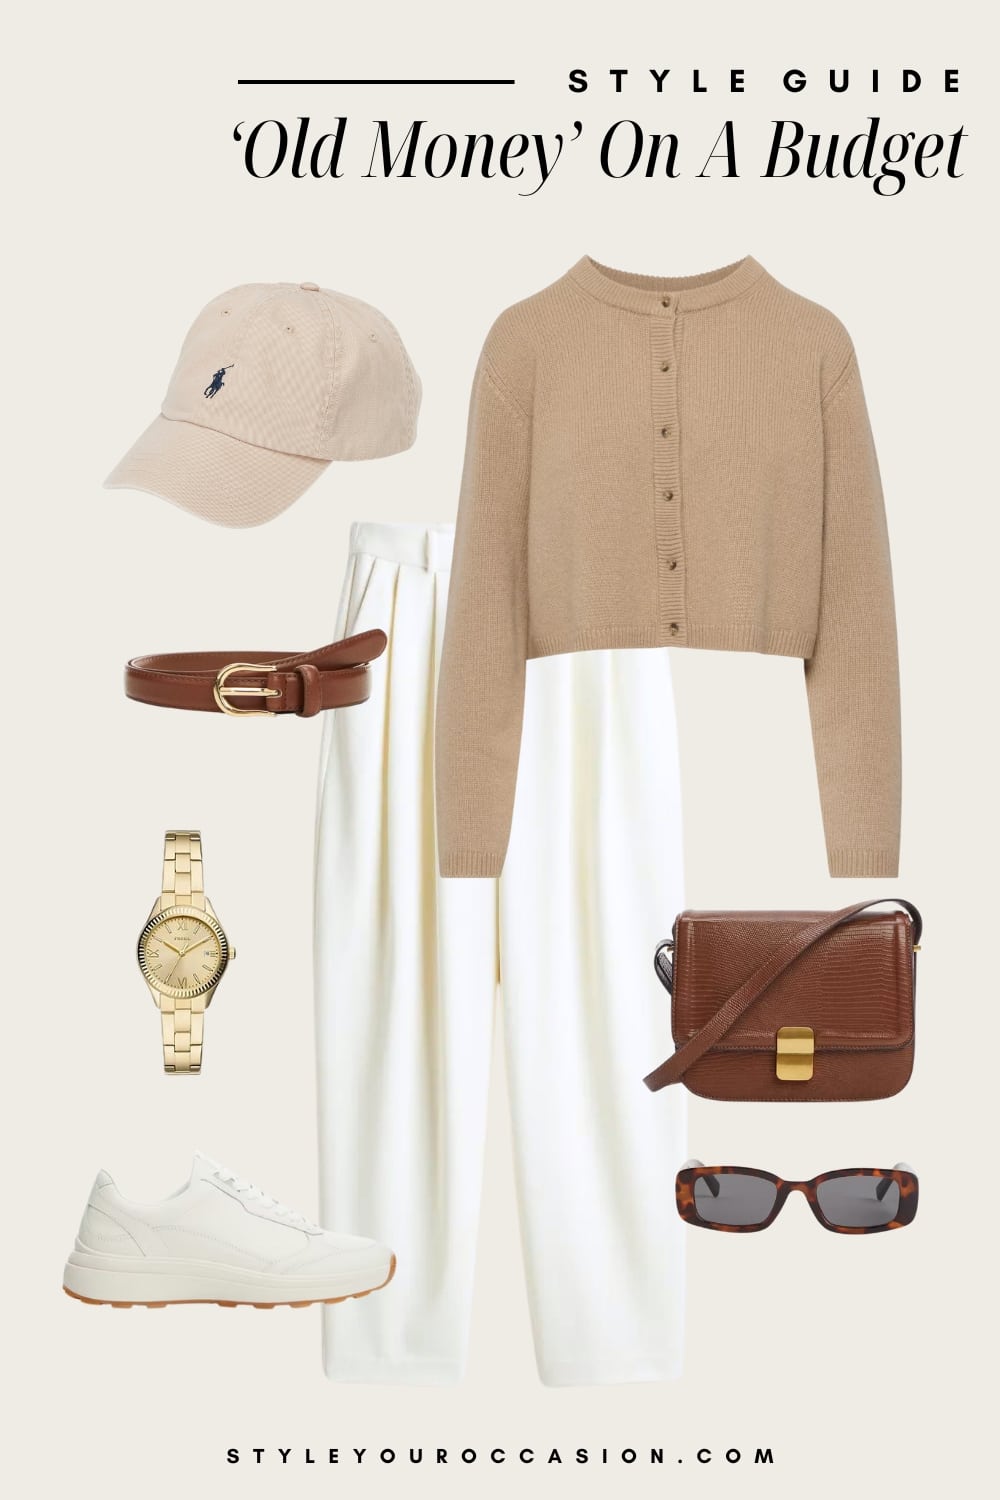 an image board of an old money outfit featuring white pleated pants, a beige cardigan, a beige baseball cap, white trainers, and tan leather and gold accessories